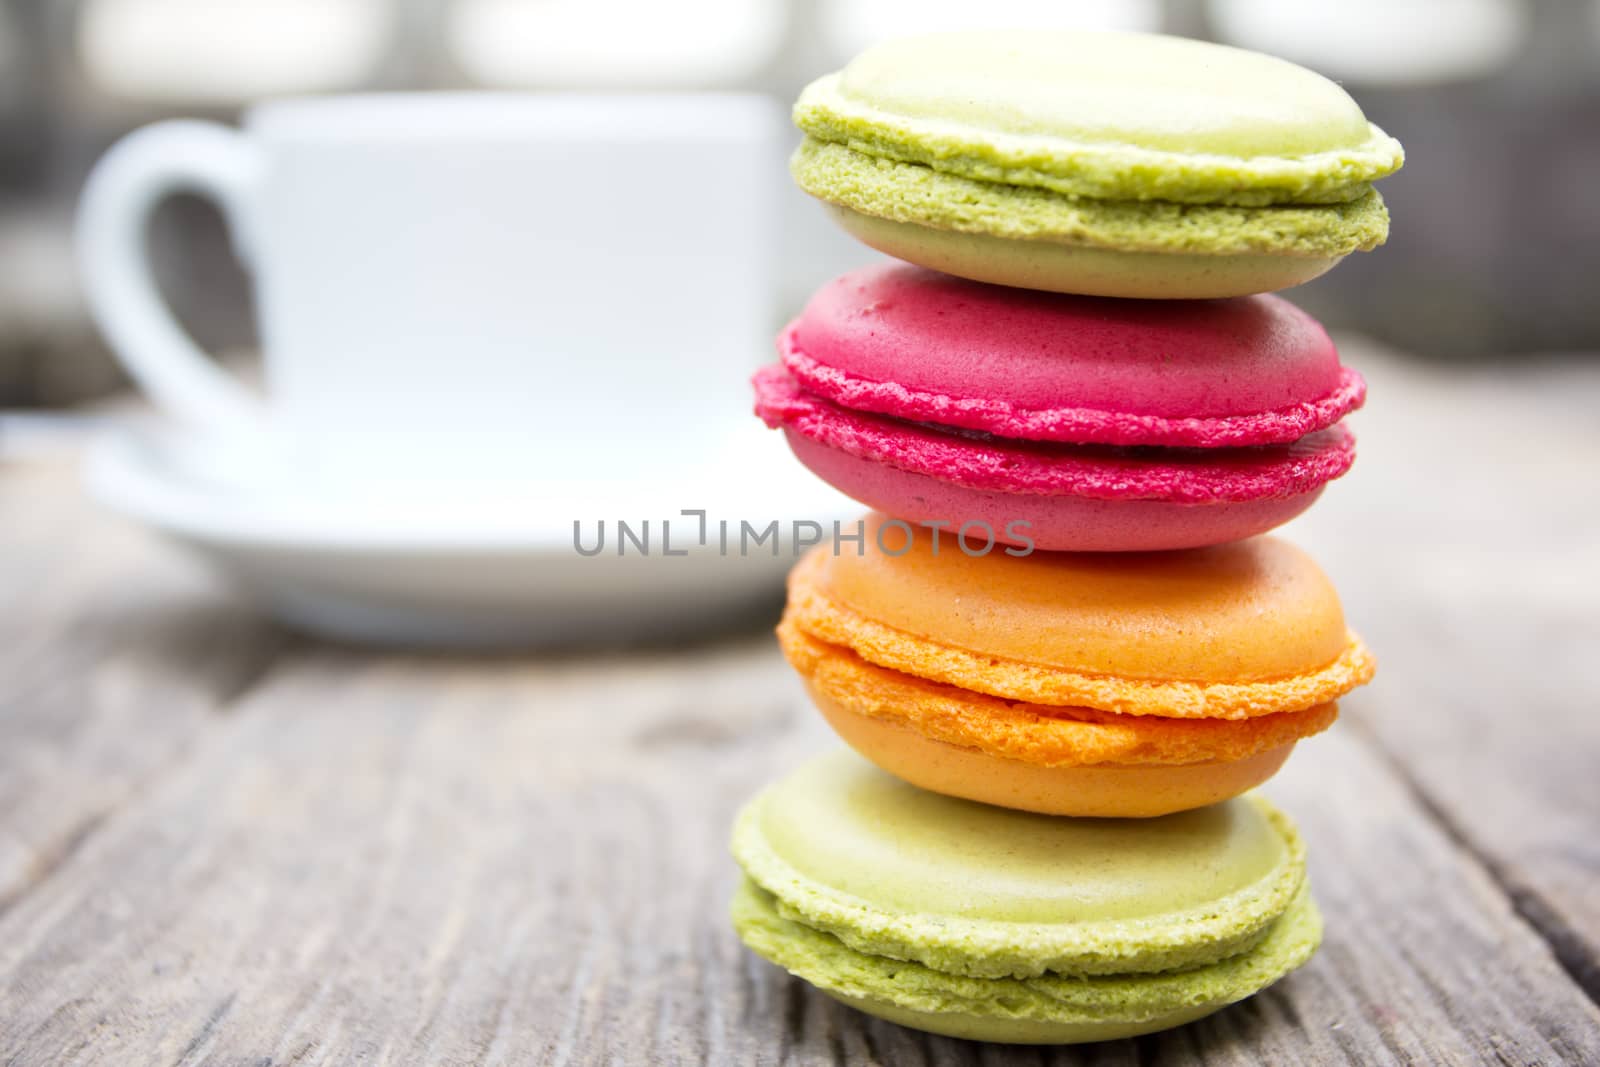 Macaroons on a wooden table by wyoosumran